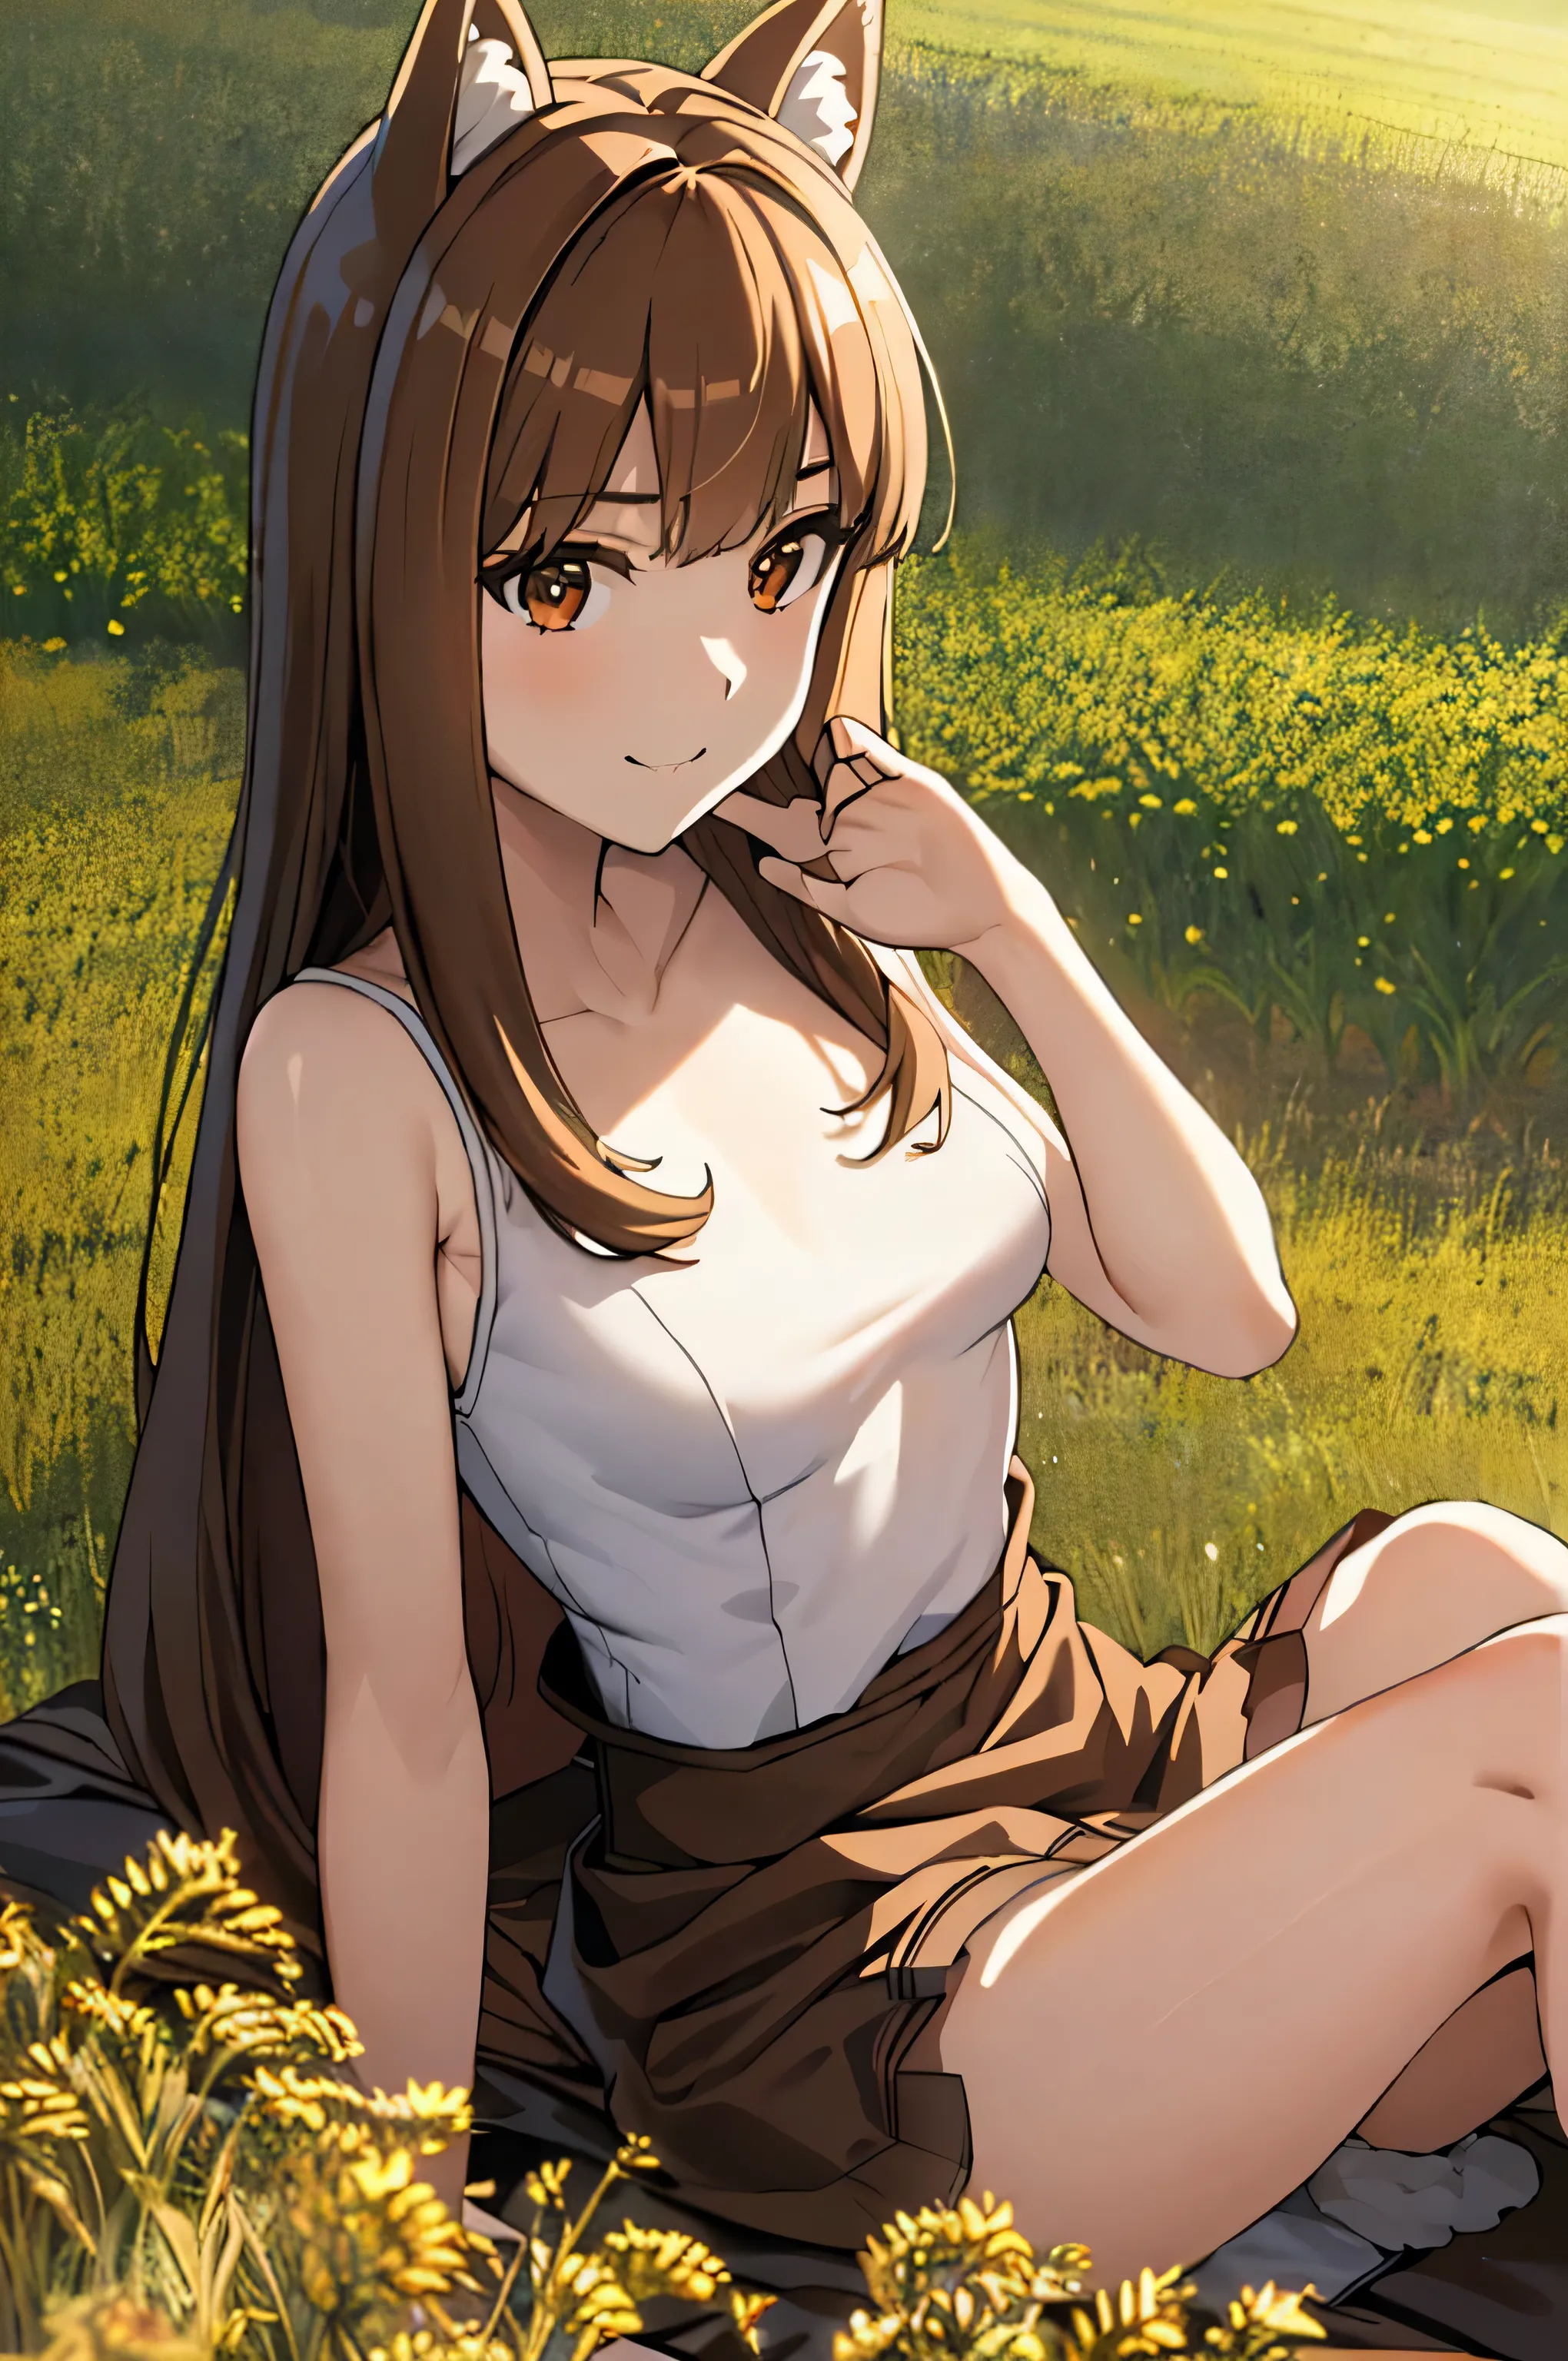 masterpiece, highest quality:1.2), Wheat field, holo, alone,Are standing, (SEXY Pose), Long Hair, Brown Hair, Dog ears, smile, (Large Breasts:1.2), White Mini＿bra, (Panties are visible:1.6, small, White), (mini skirt:1.4, Brown leather), (Fluffy tail grows,From the waist)